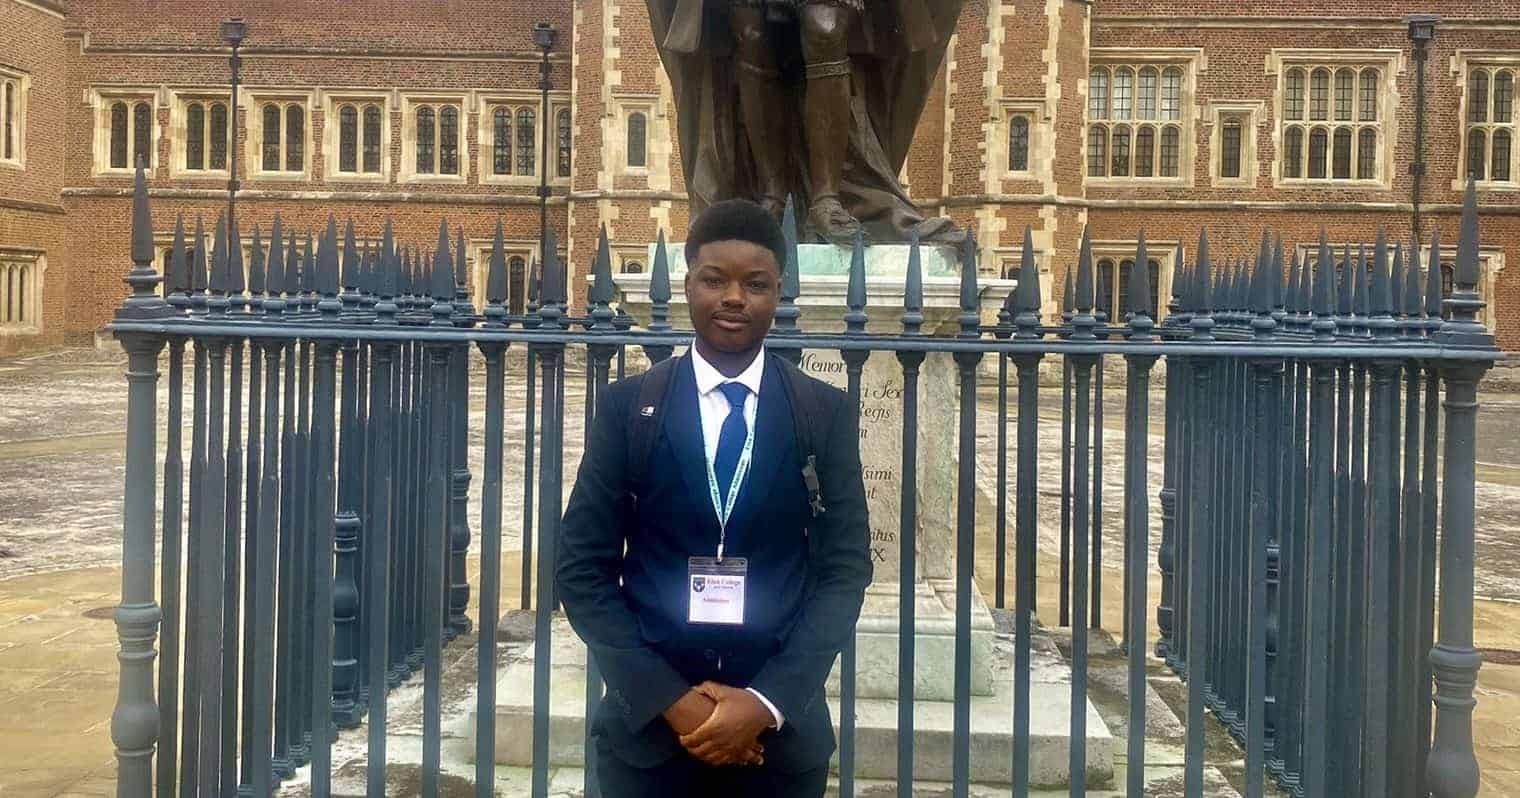 Issah on a visit to Eton College